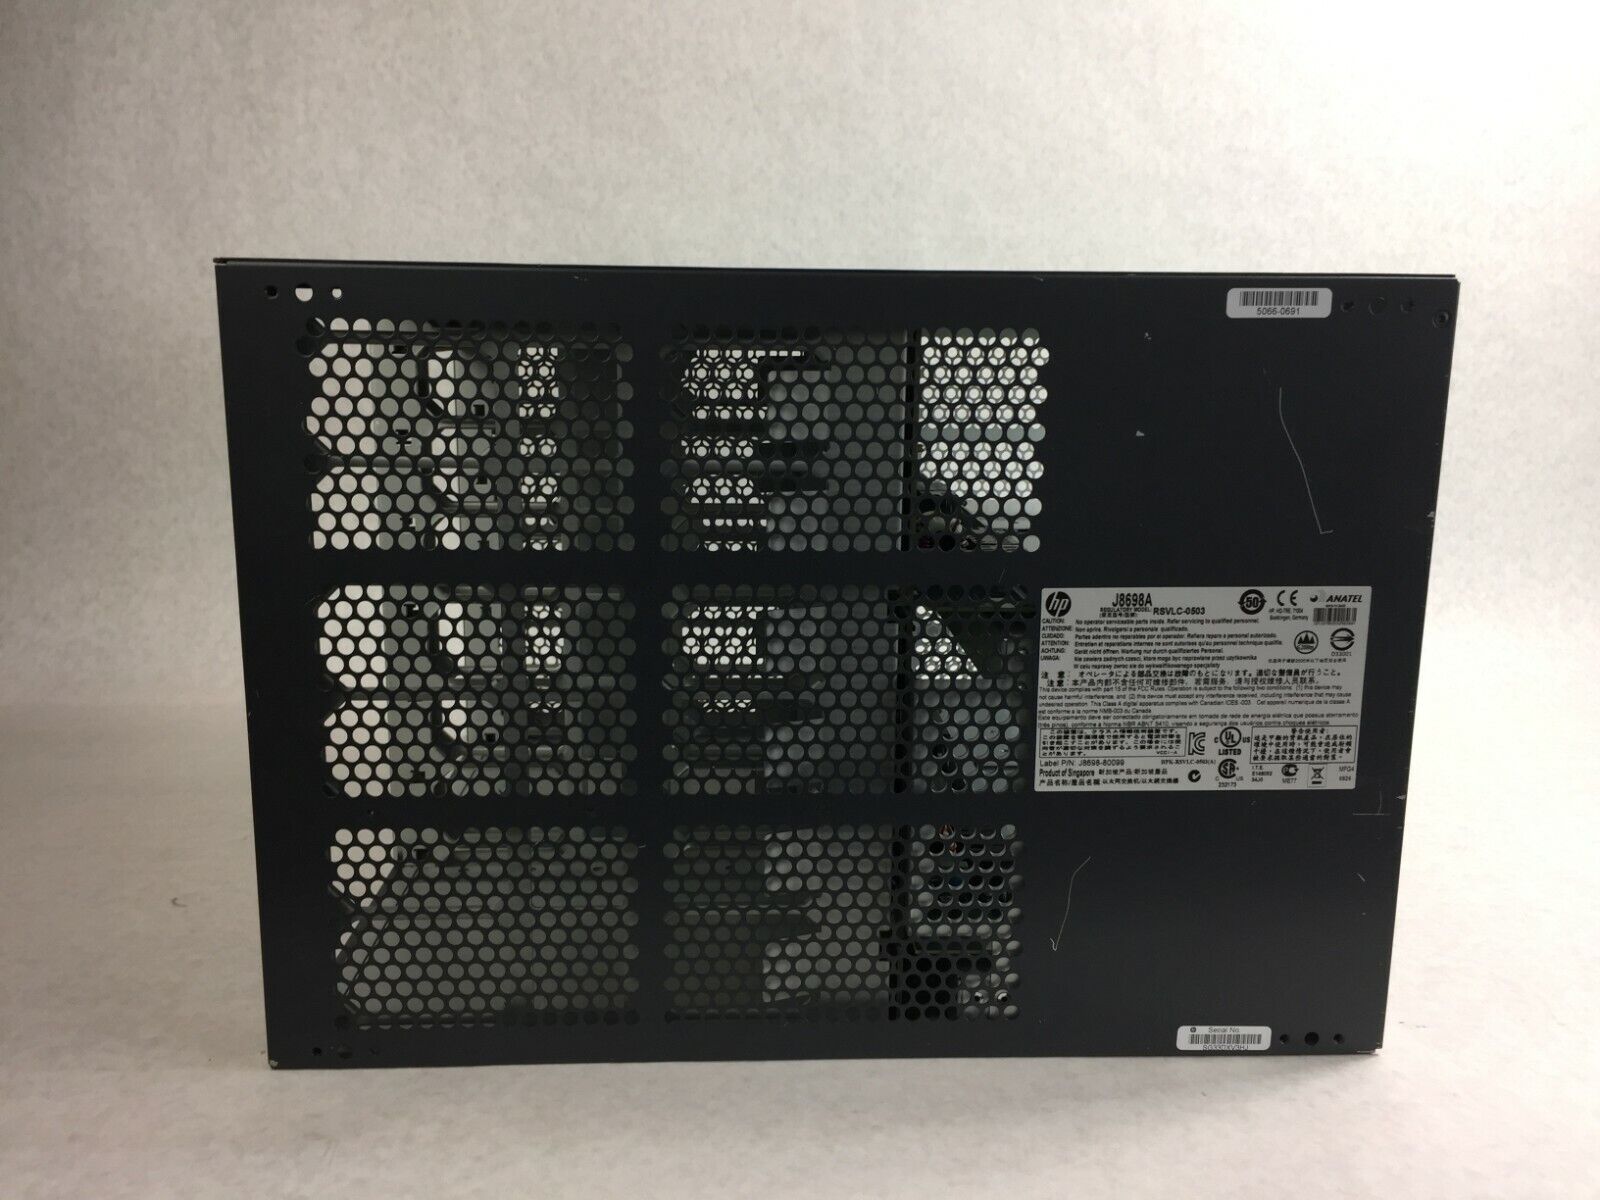 HP E5412 zl J8698A Switch Chassis